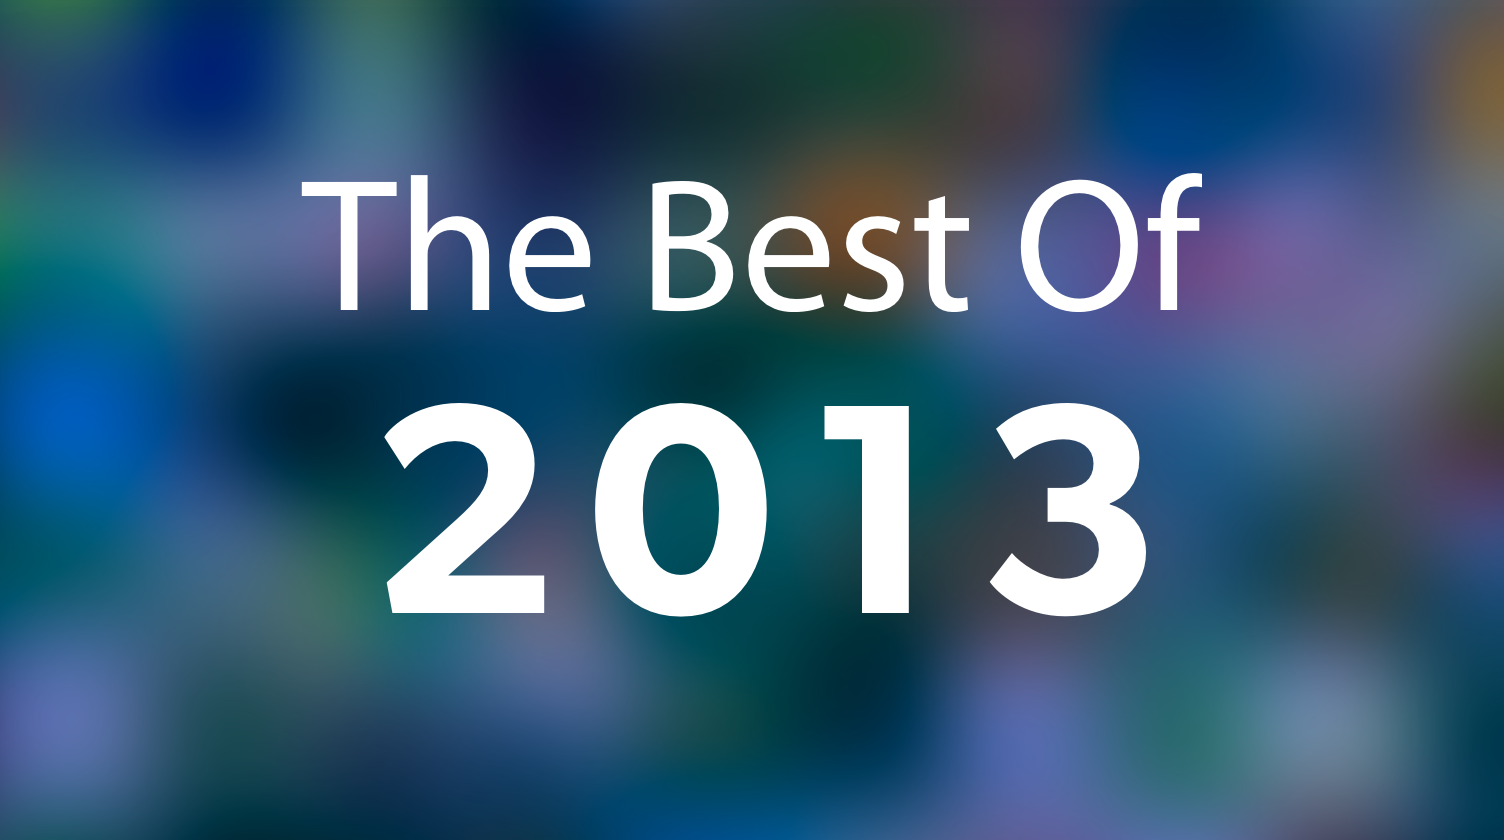 The Best of 2013